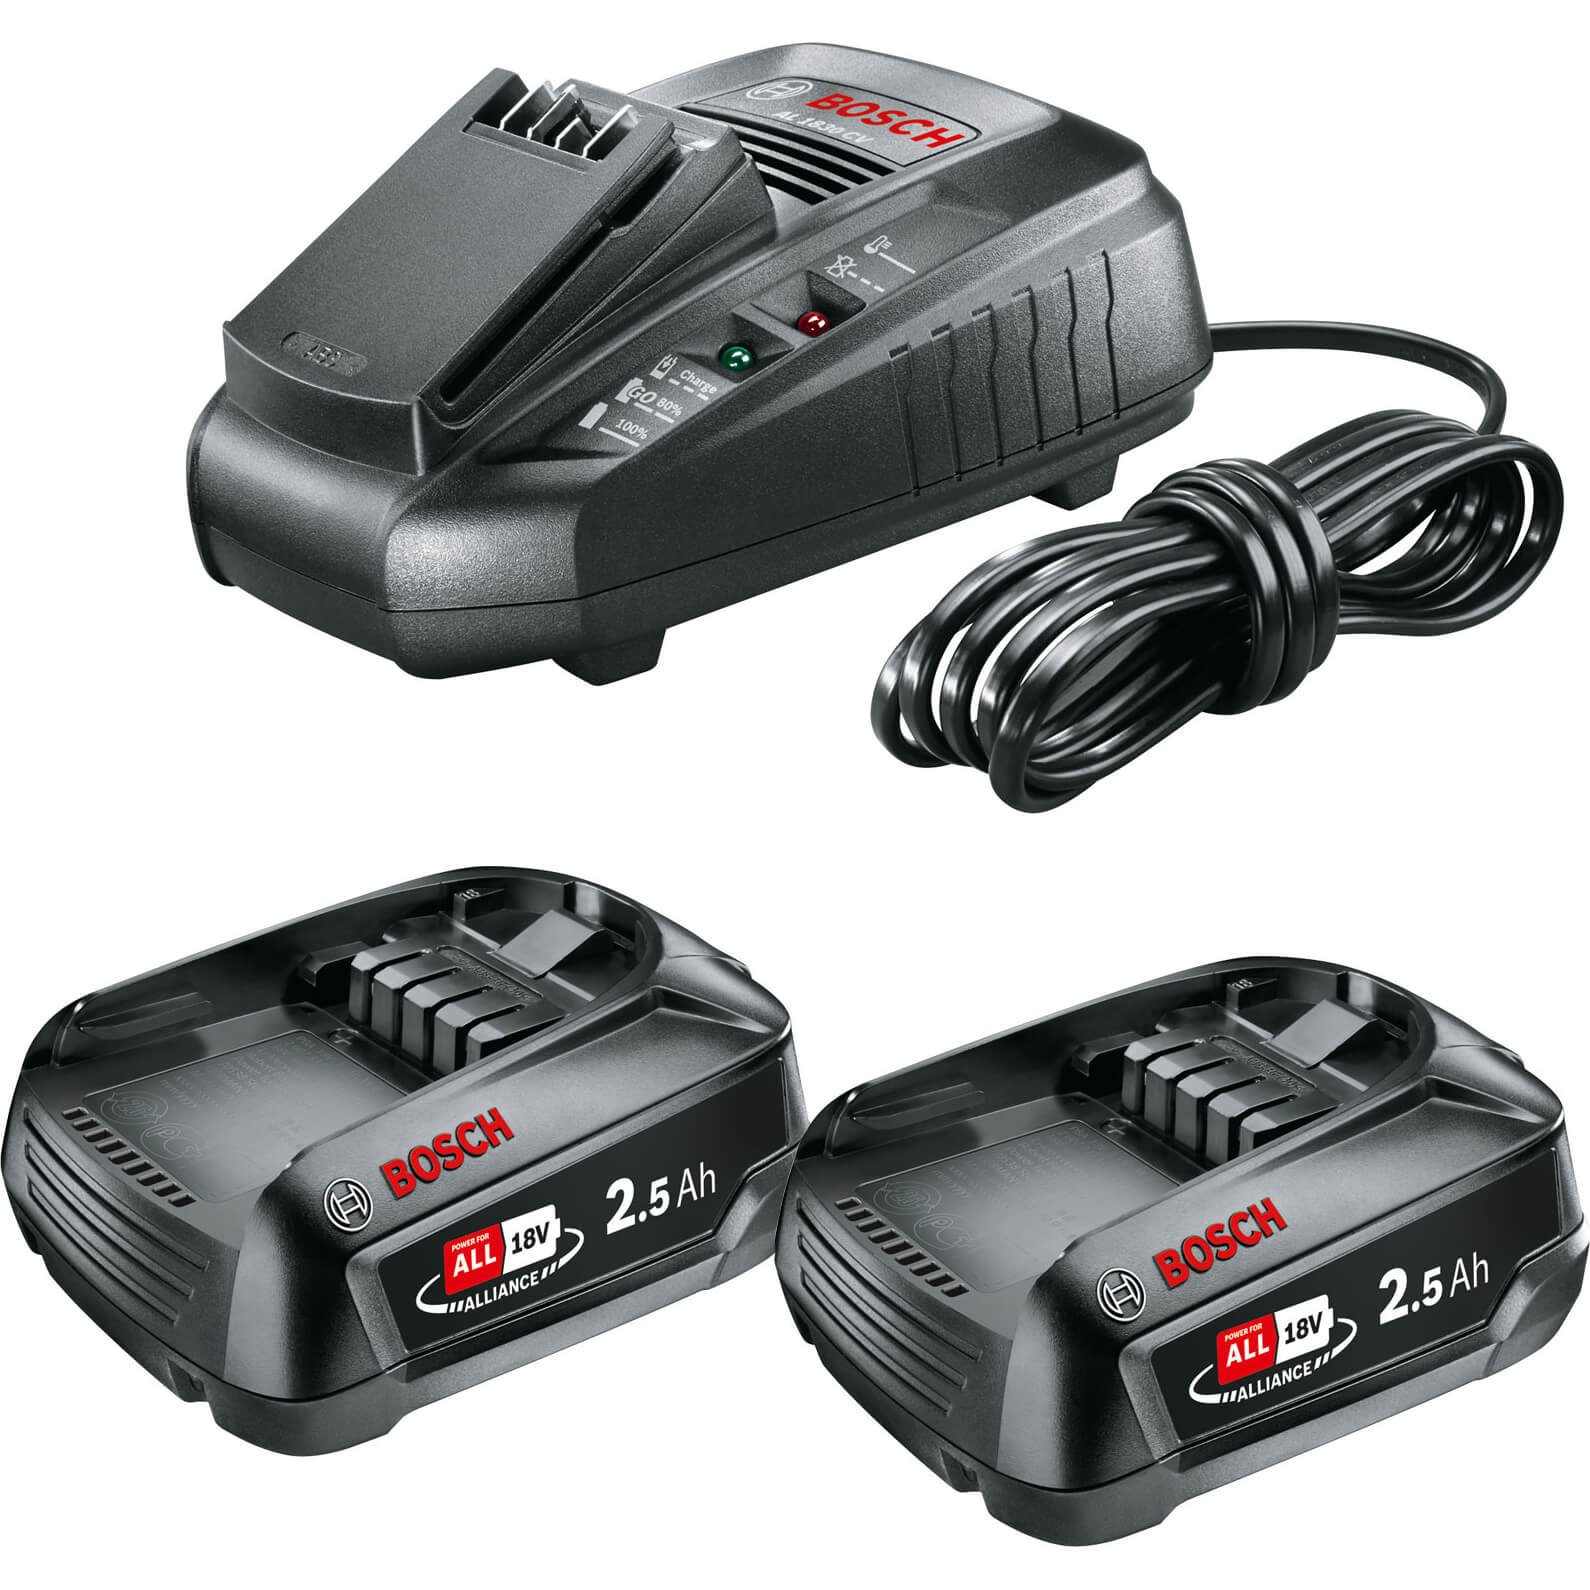 Image of Bosch Genuine GREEN 18v Cordless Li-ion Twin Battery 2.5ah and 3A Fast Charger 2.5ah